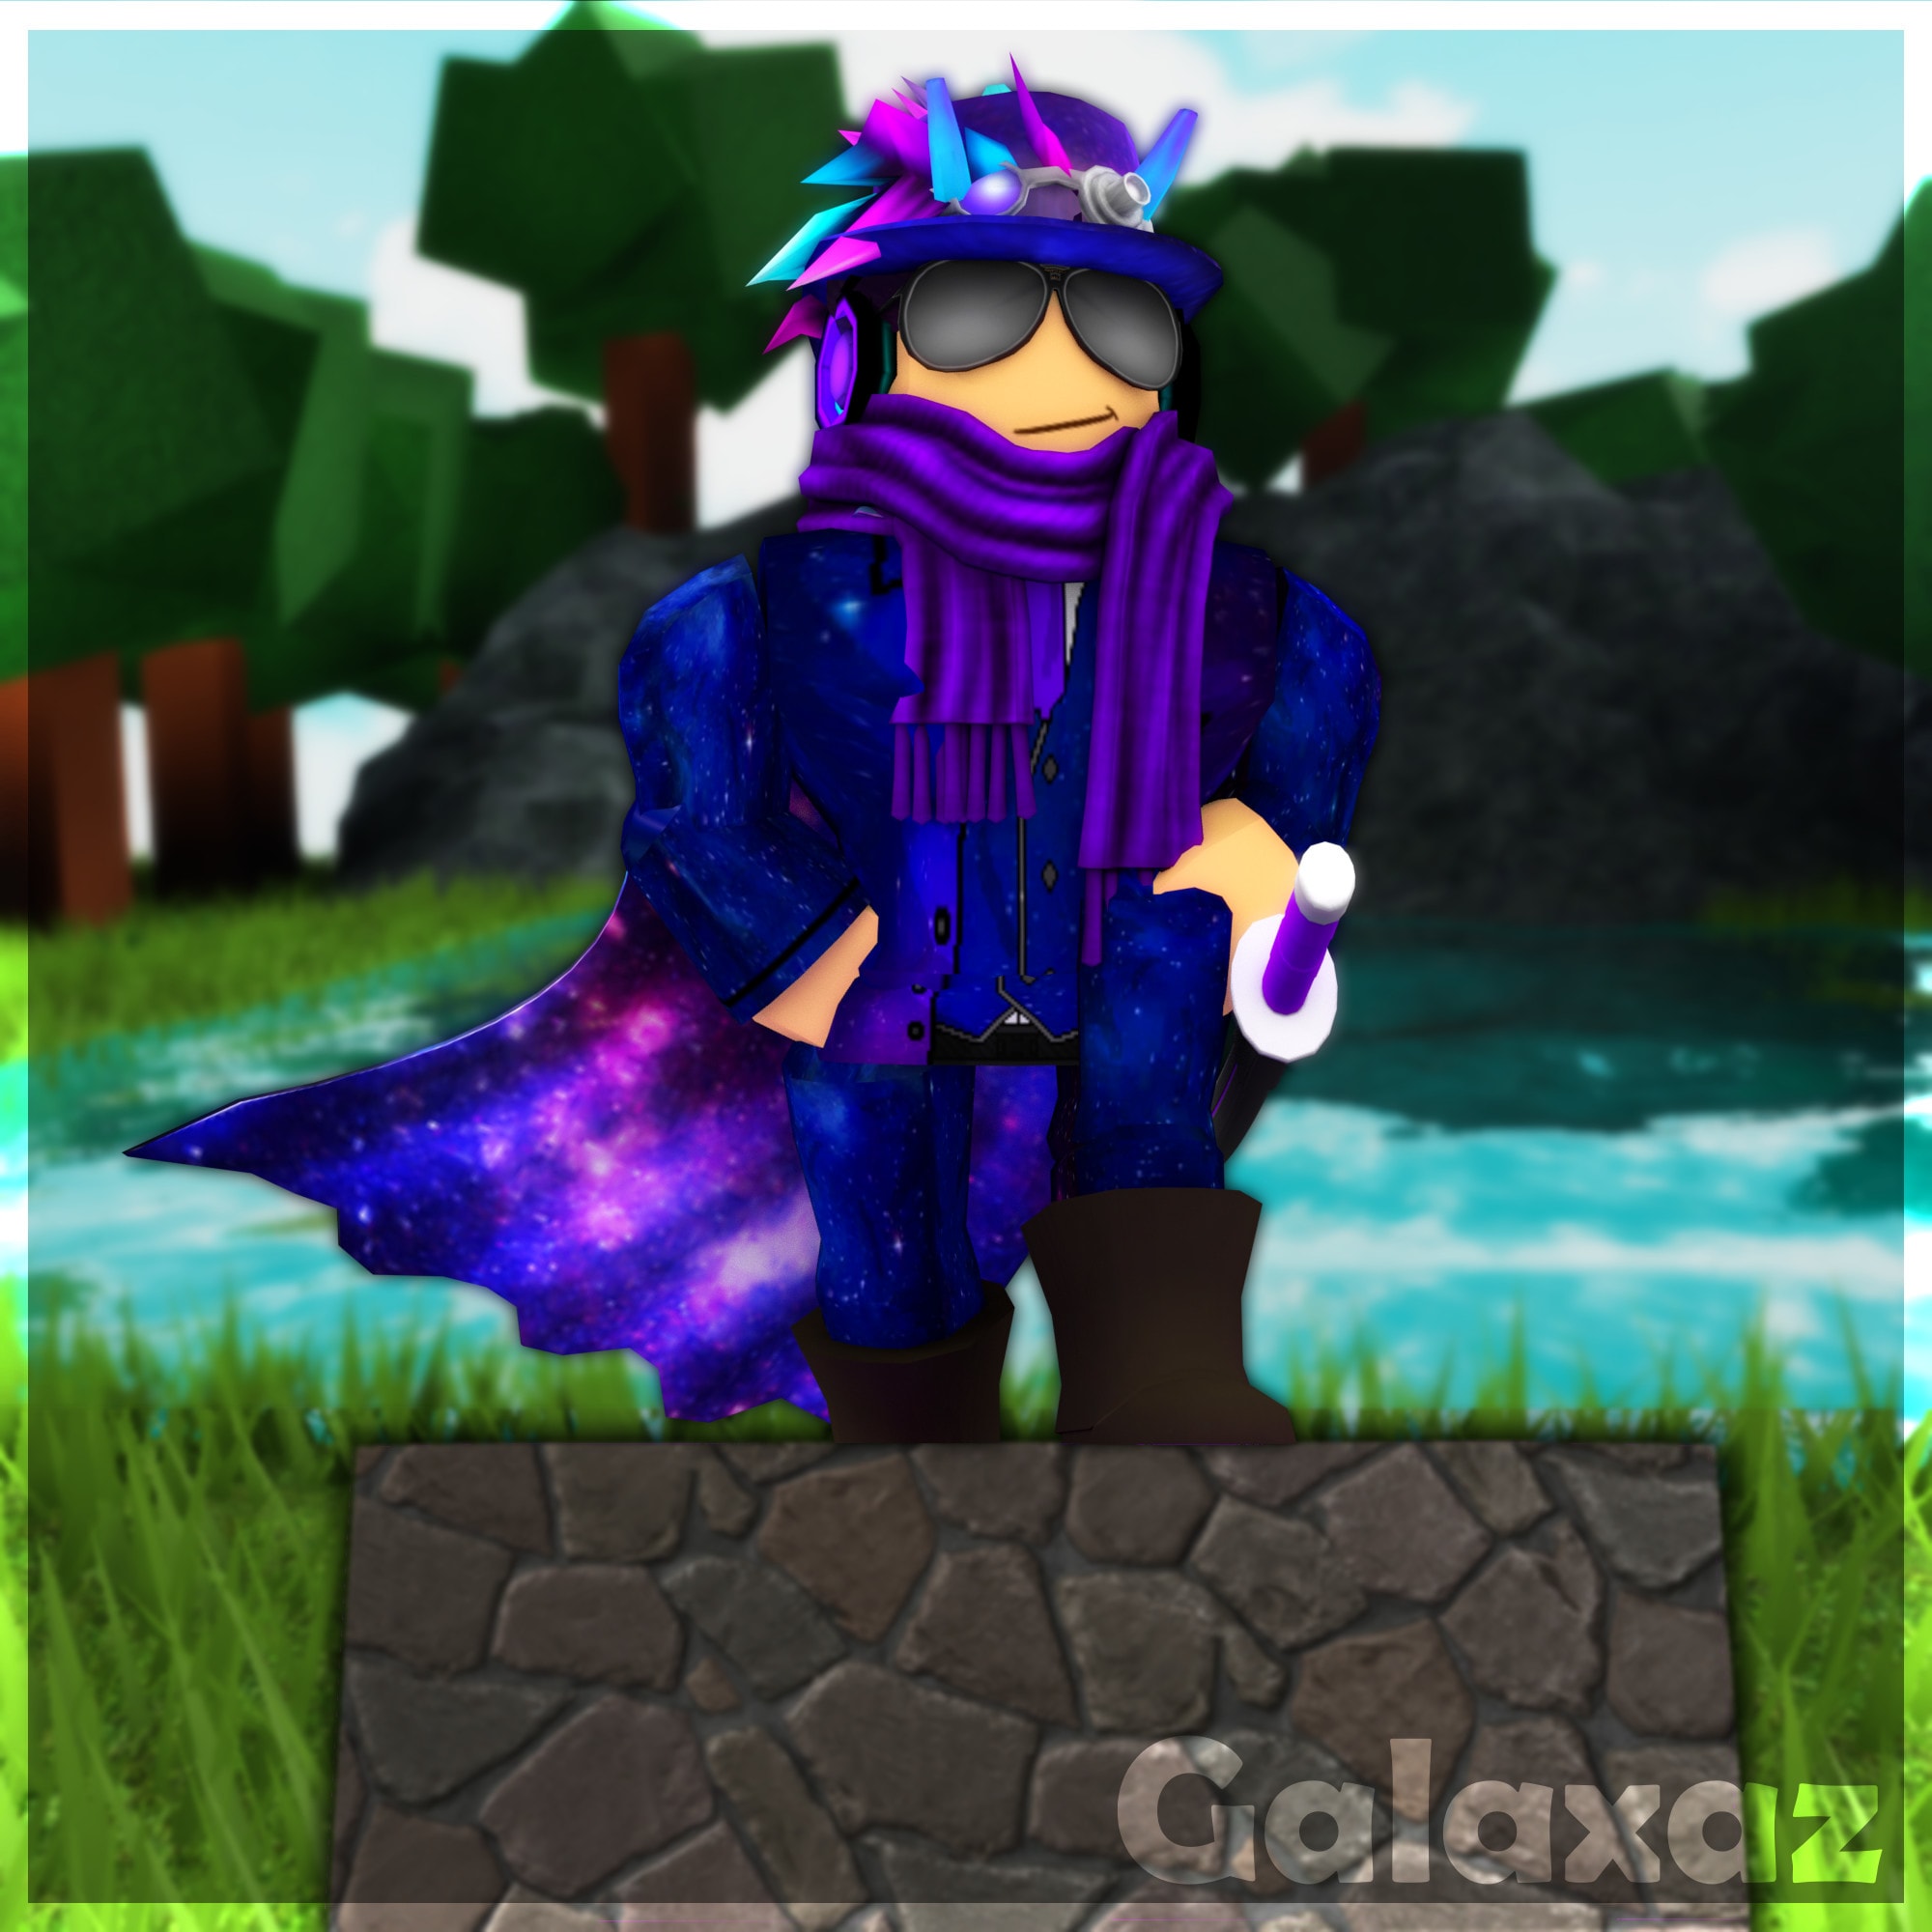 Create A Professional Roblox Gfx By Galaxaz - how to make a roblox gfx on pc